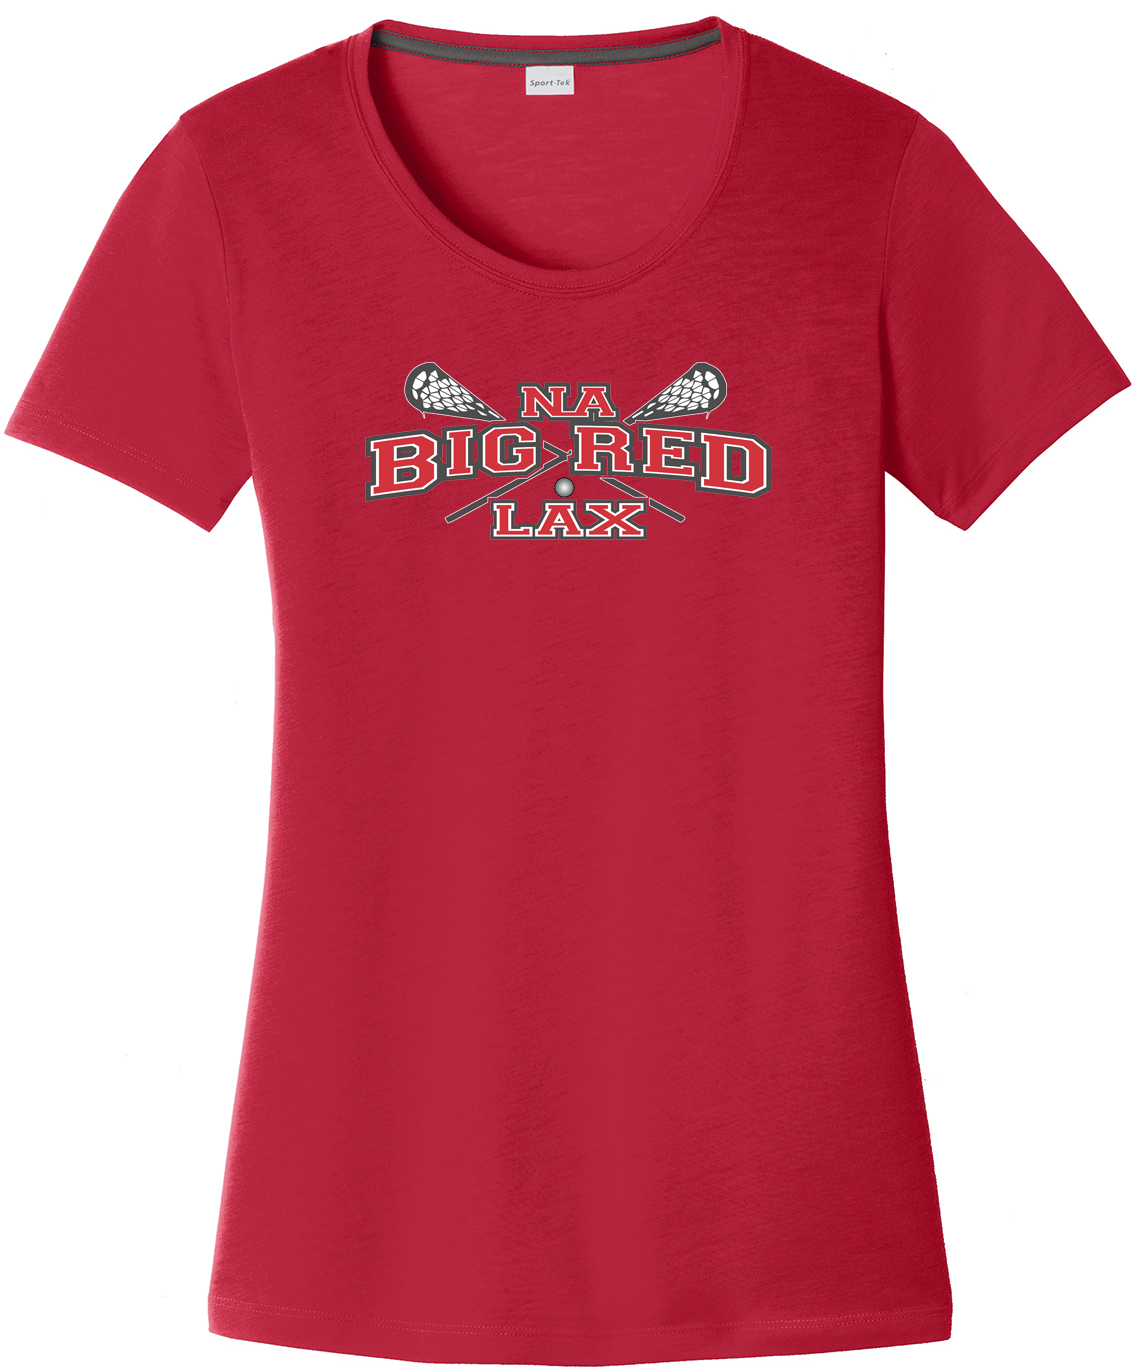 NA Big Red Lax Women's Red CottonTouch Performance T-Shirt